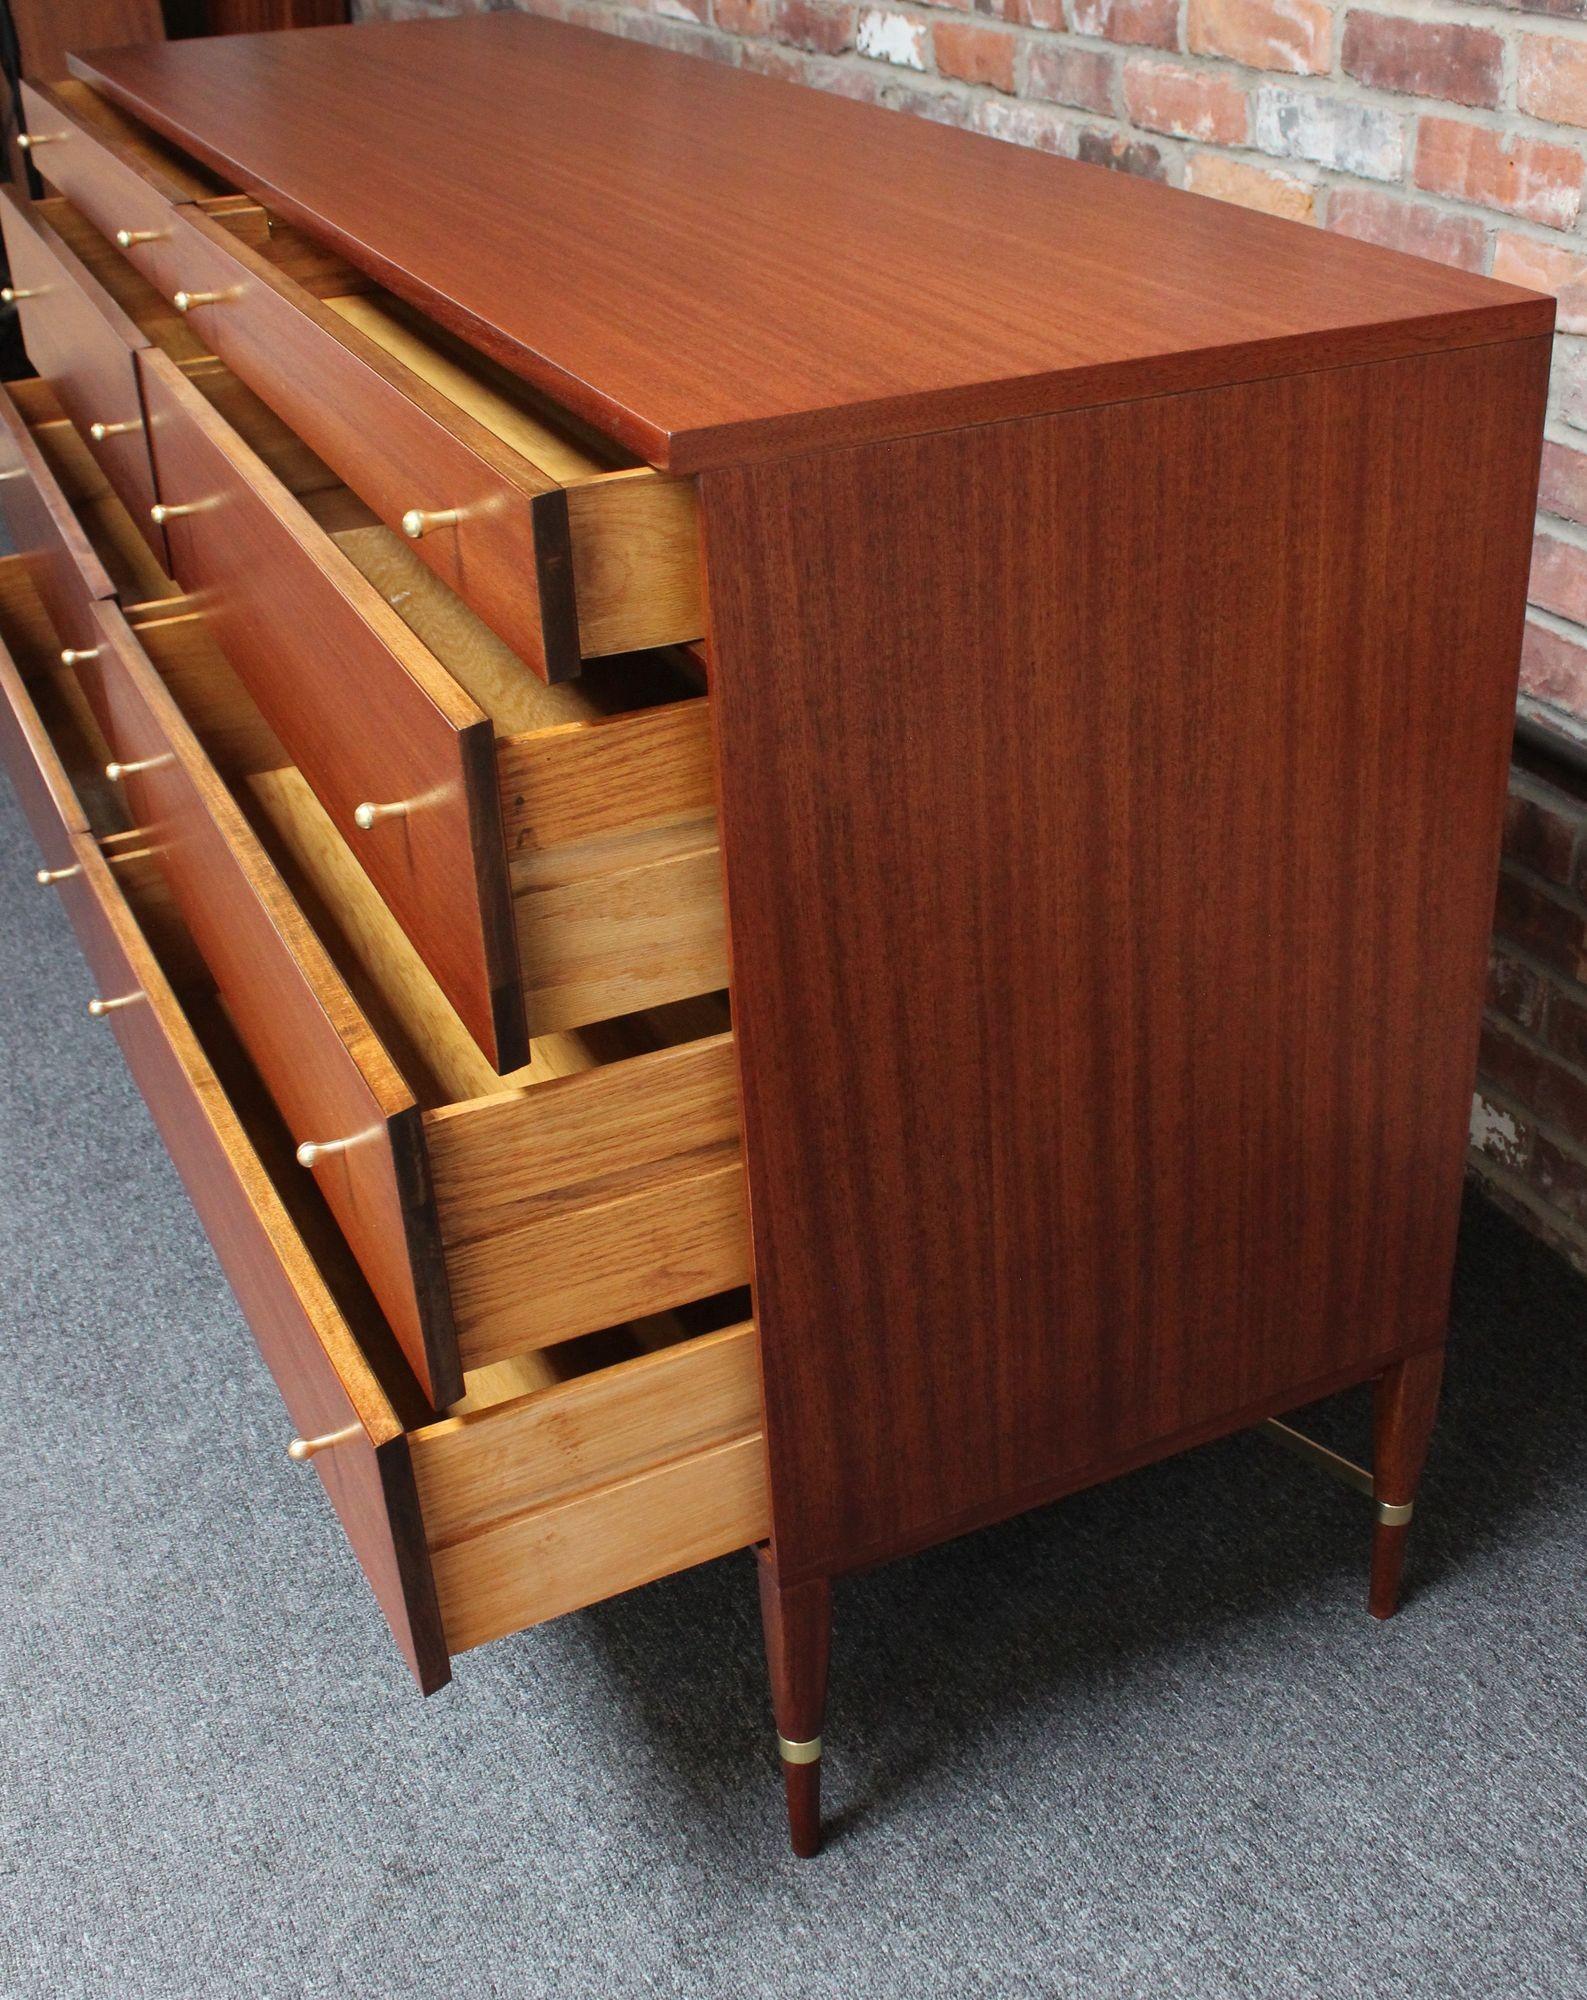 Paul Mccobb Calvin Group Mahogany and Brass Double Dresser / Chest of Drawers For Sale 1